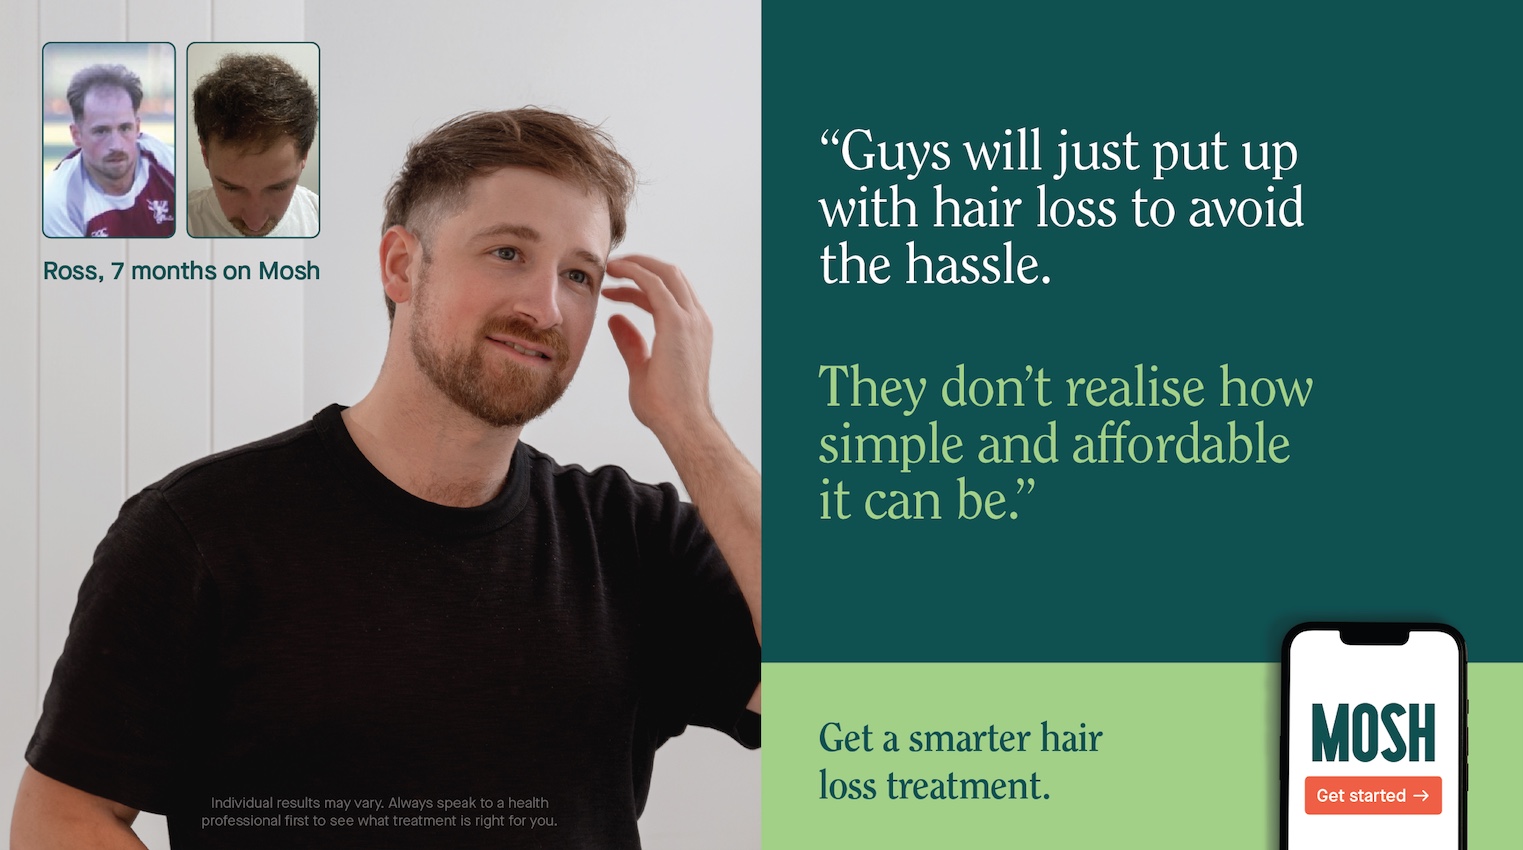 Not your dad’s hair clinic: Mosh launches cheeky outdoor campaign across Melbourne